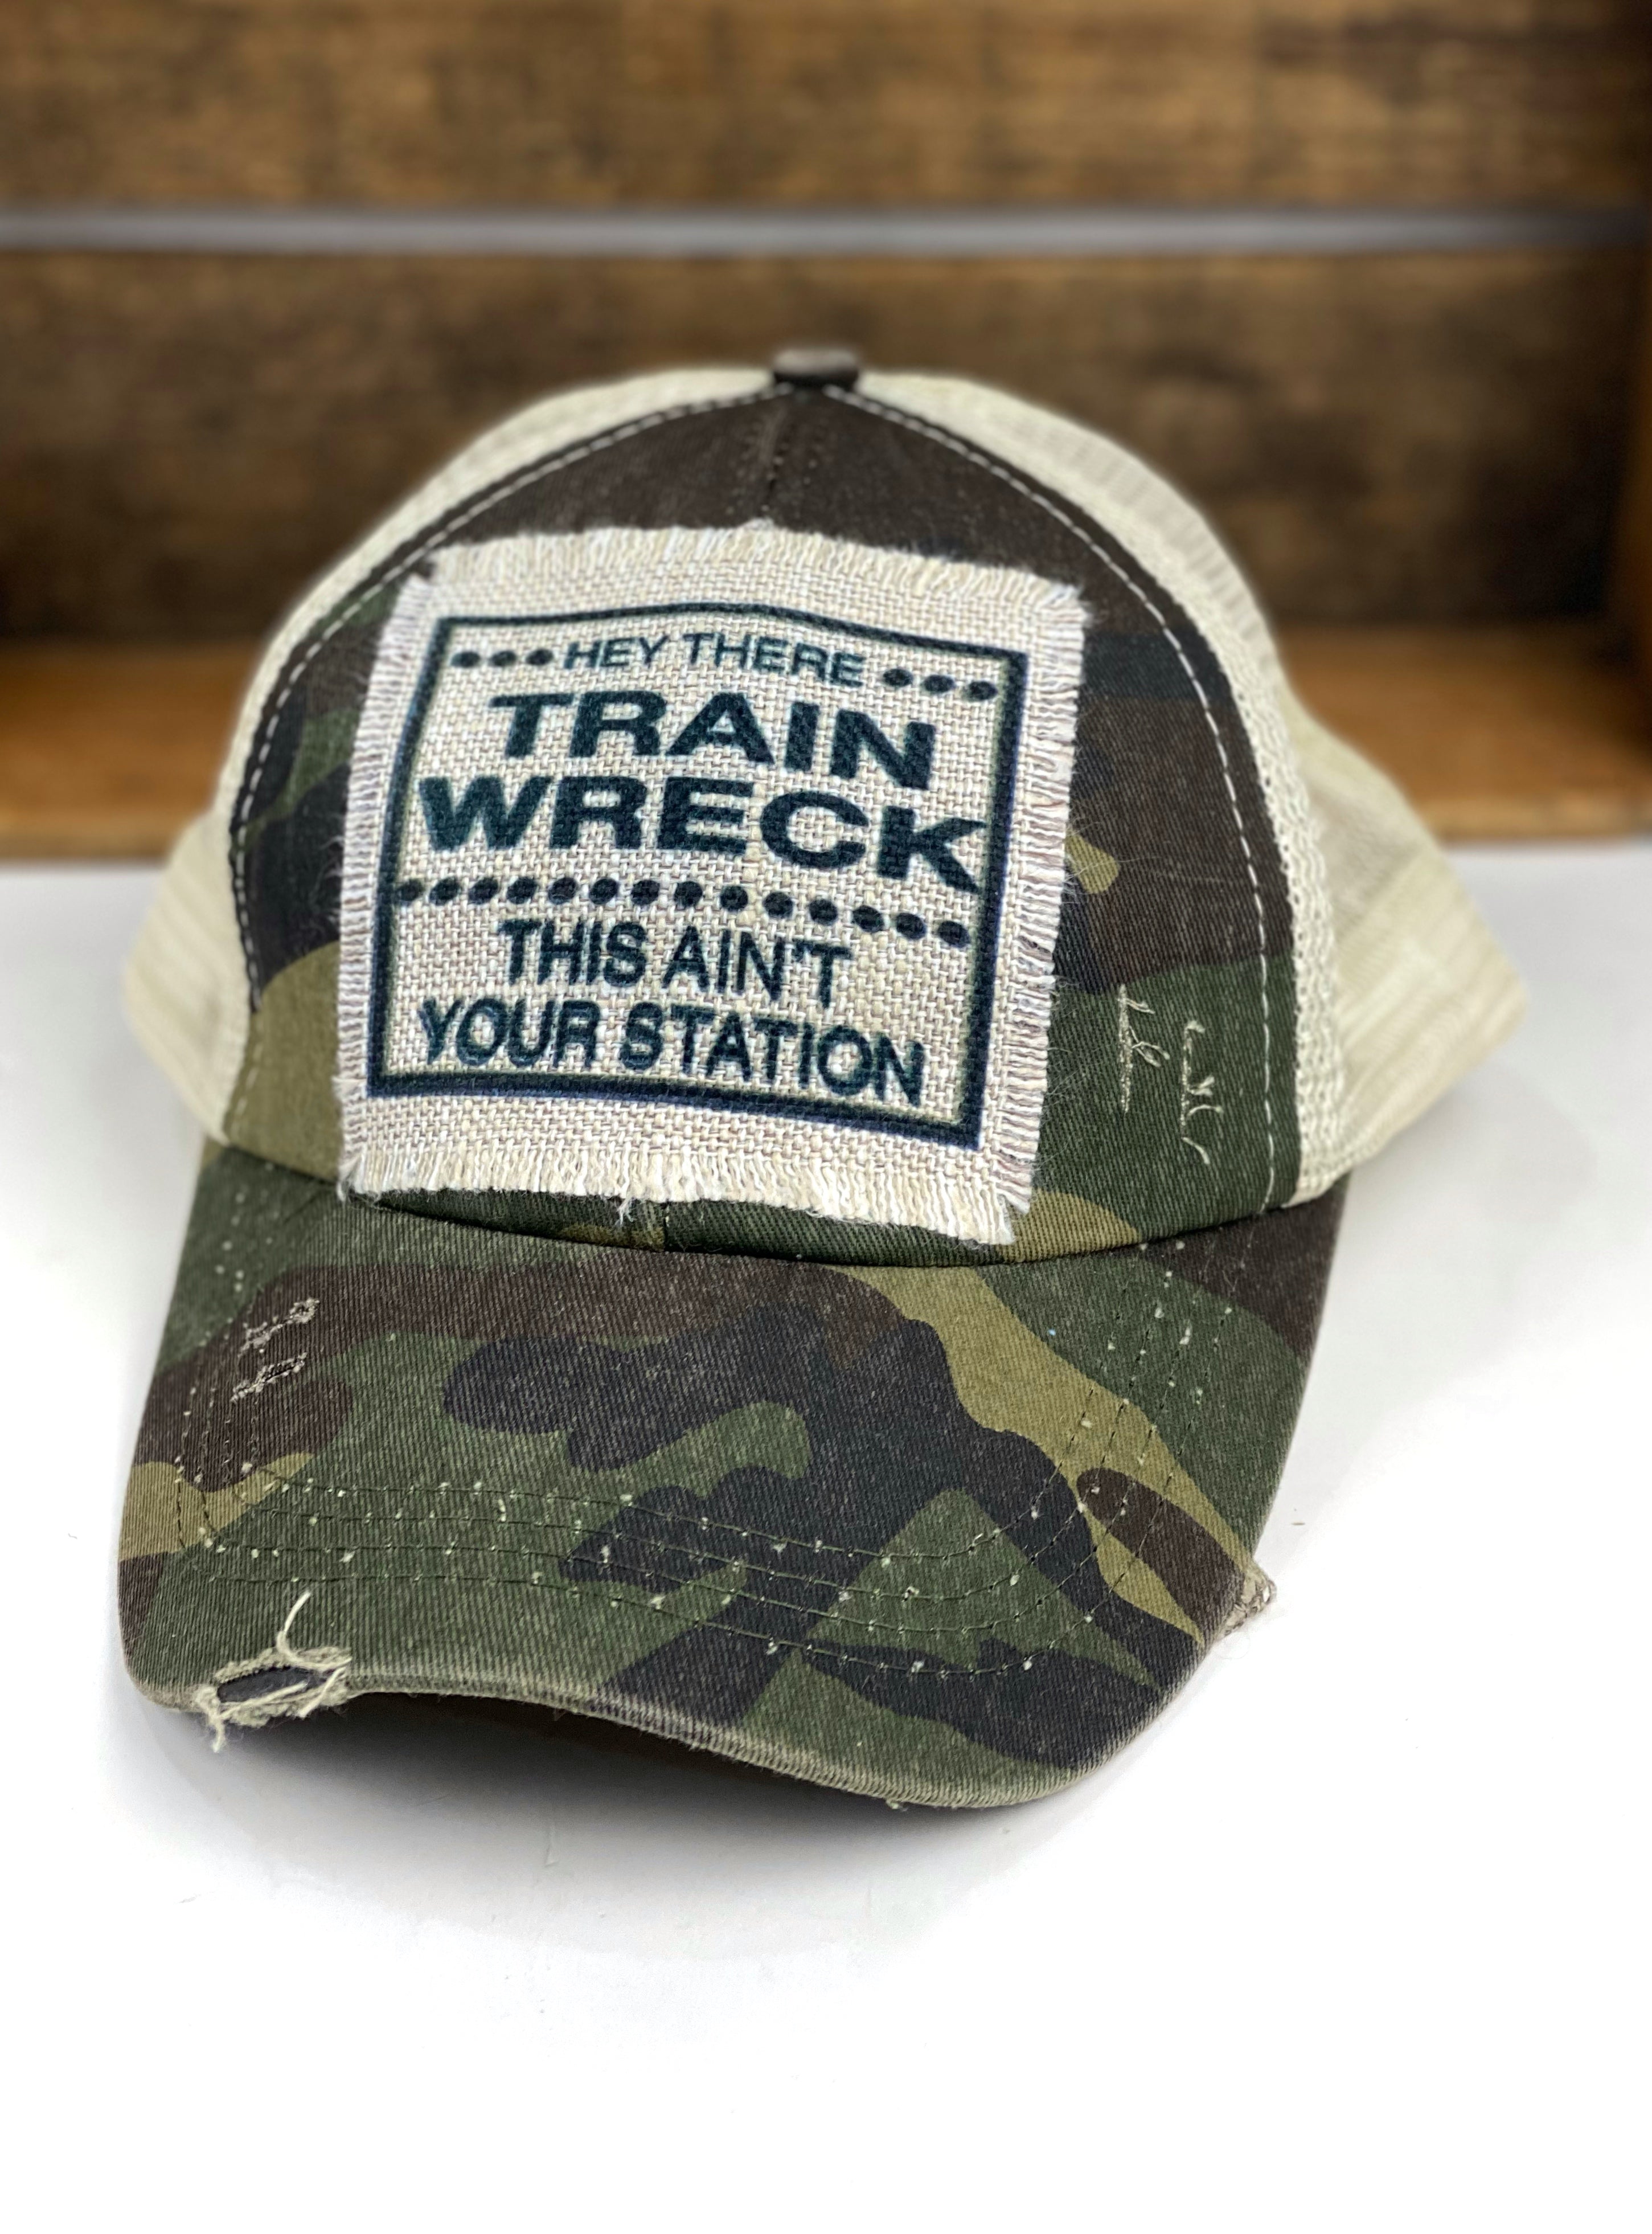 Hey There Trainwreck This Aint Your Station Lightweight Canvas Tote Bag, Leopard Print Mesh Ponytail Baseball Cap, Hat Patch